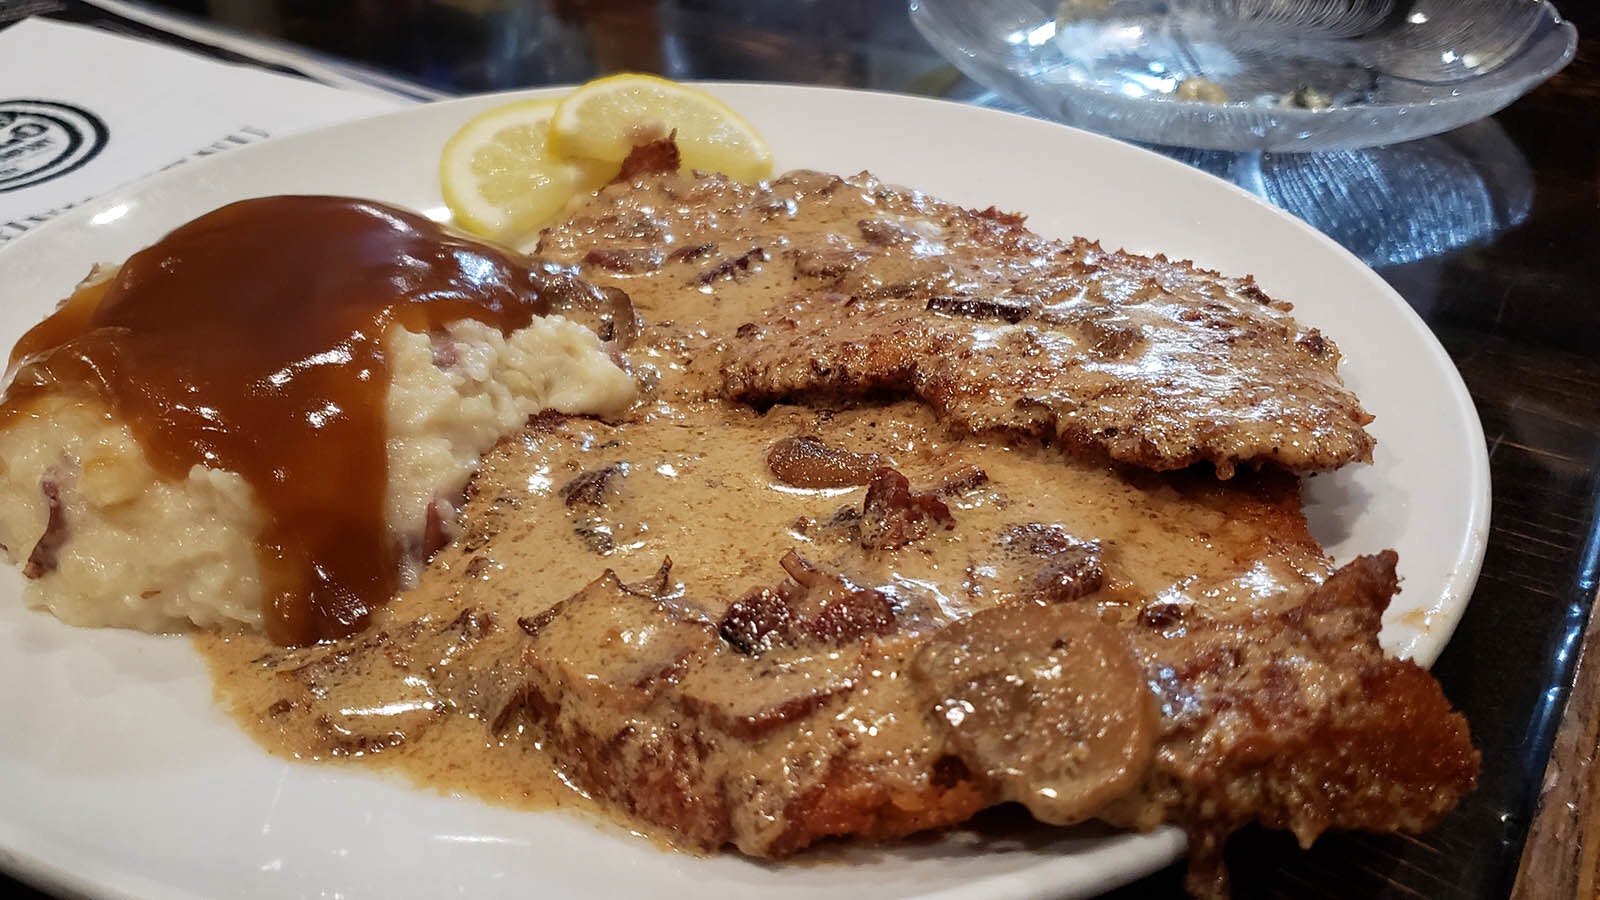 The jagerschnitzel at One Eyed Buffalo is something special. The sauce is mushroom brandy, and the dish was taught to owner Jen Fisher by a German woman.